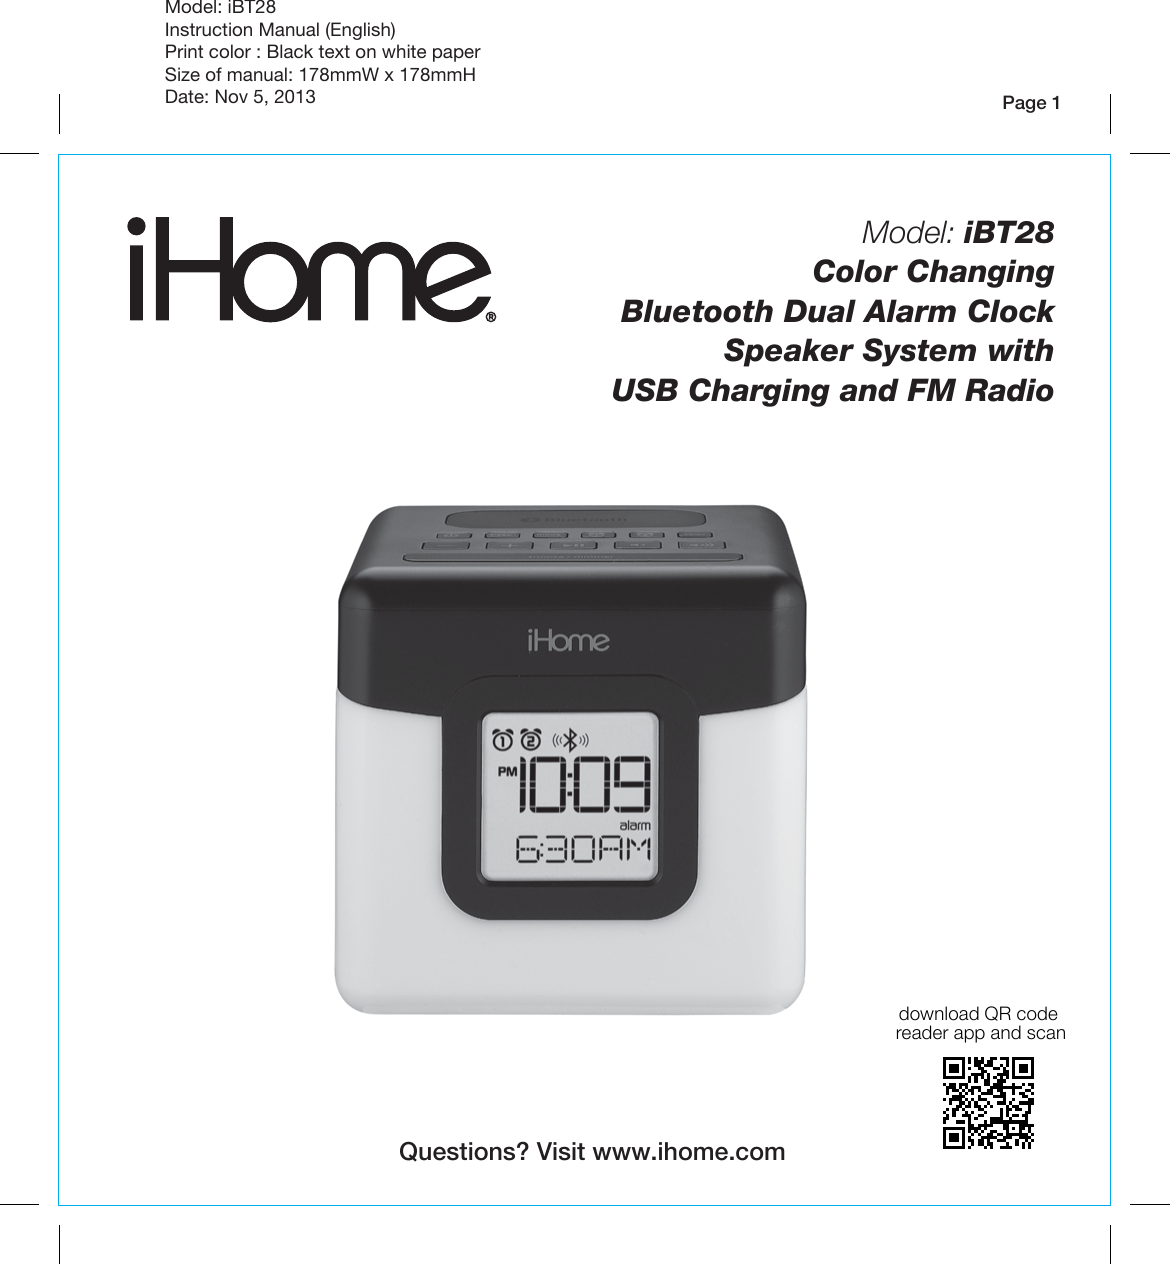 Page 1Model: iBT28Instruction Manual (English)Print color : Black text on white paperSize of manual: 178mmW x 178mmHDate: Nov 5, 2013Model: iBT28  Color Changing Bluetooth Dual Alarm Clock Speaker System with USB Charging and FM RadioQuestions? Visit www.ihome.comdownload QR code reader app and scan